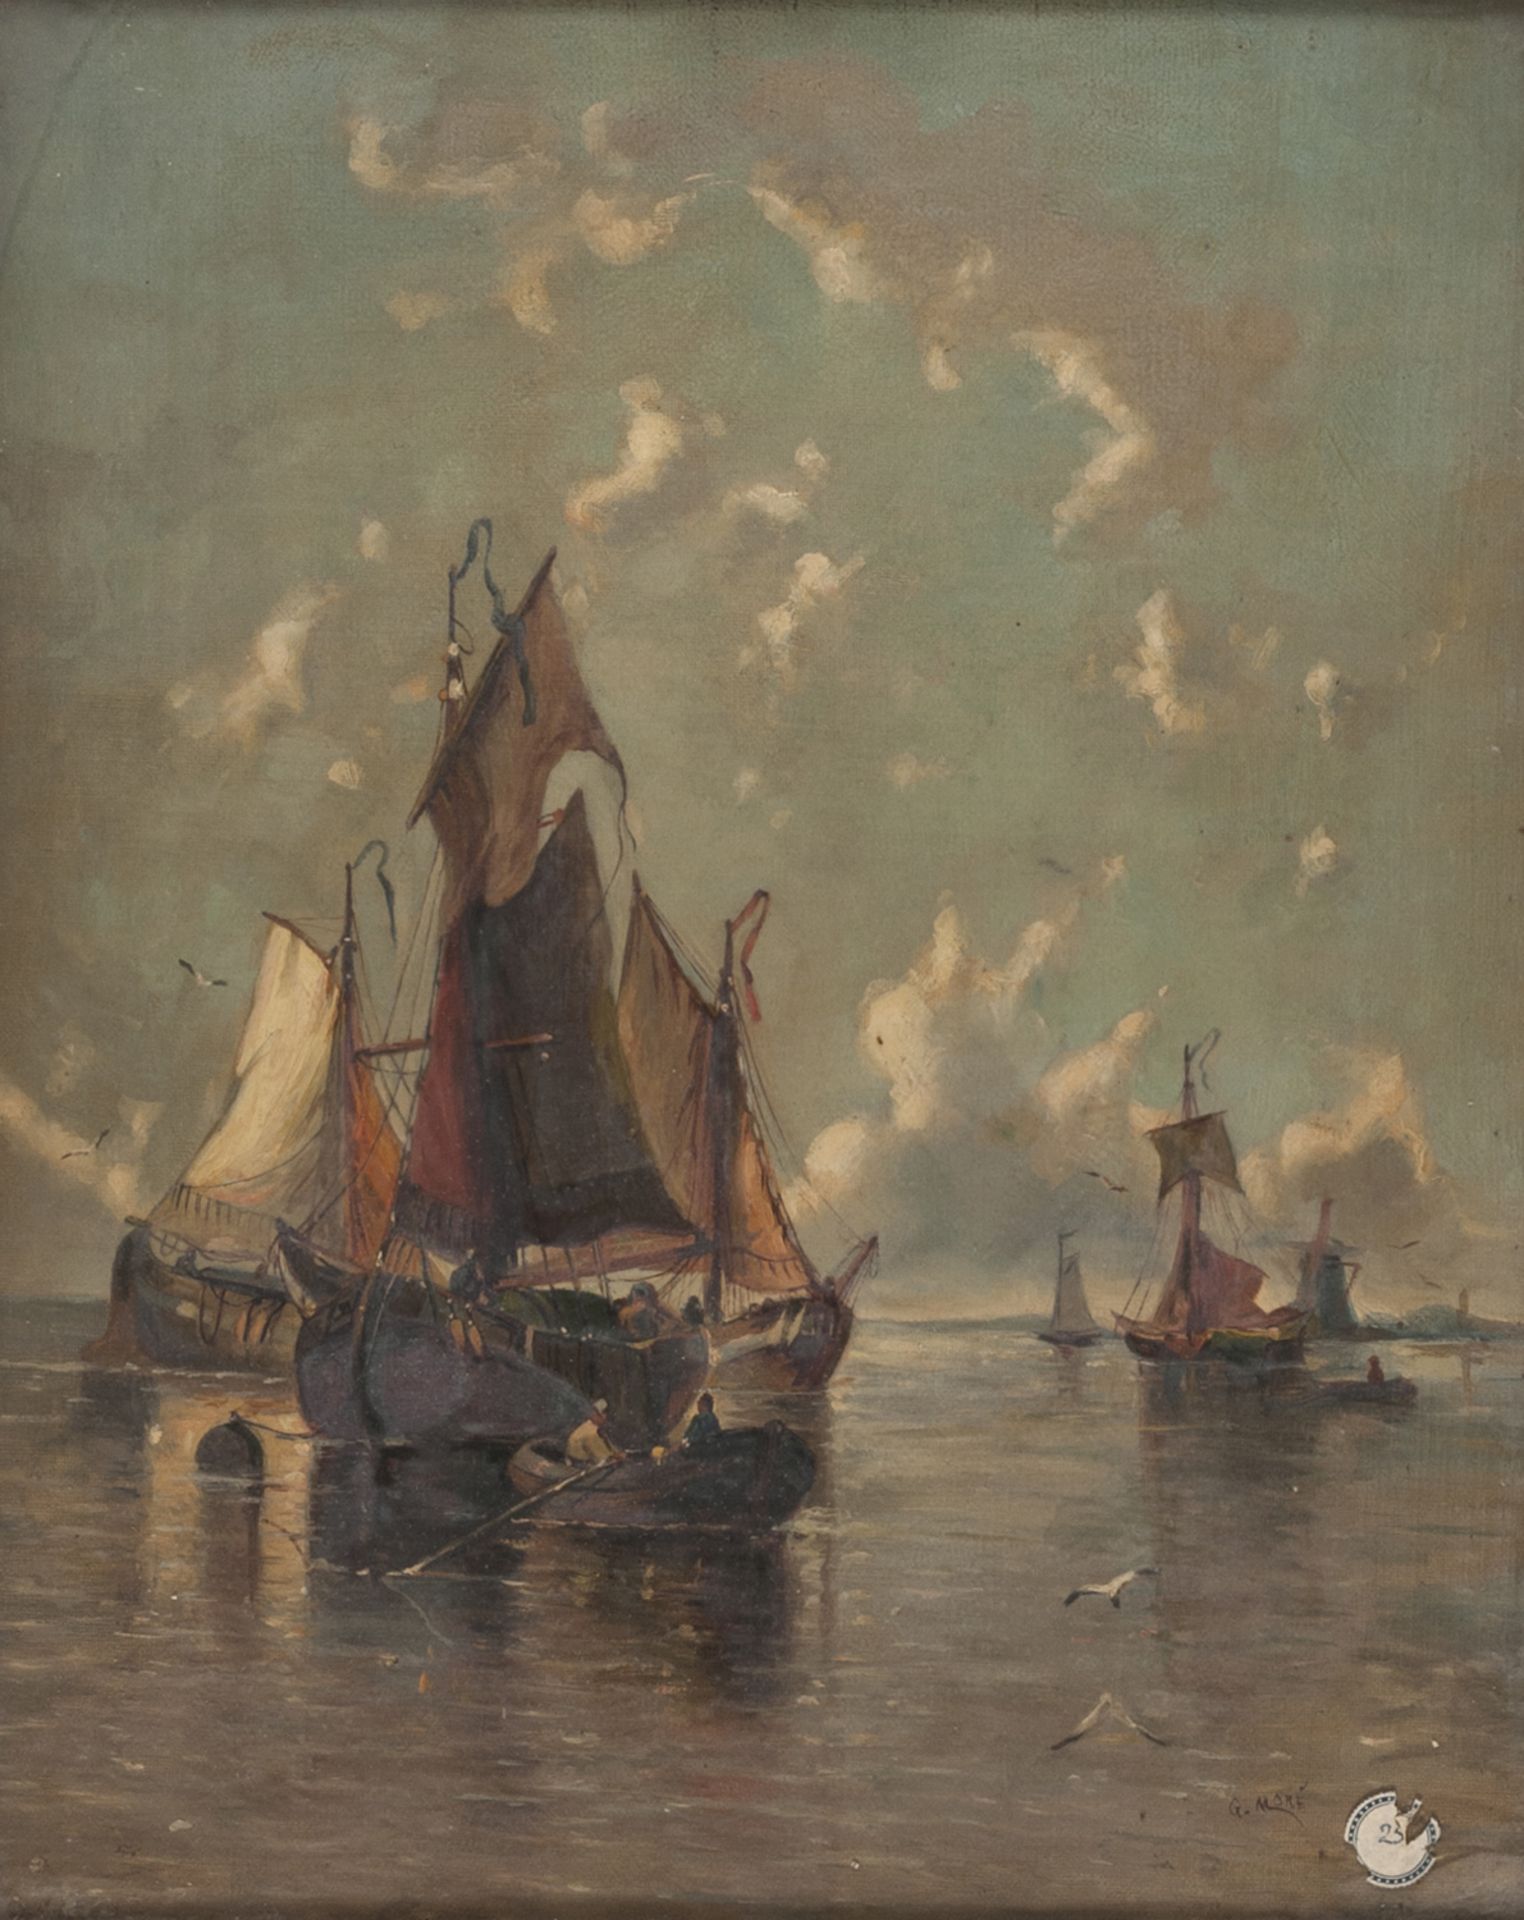 OIL PAINTING OF SAILSHIPS IN THE LAGOON Signed 'G. MORI' 19TH CENTURY